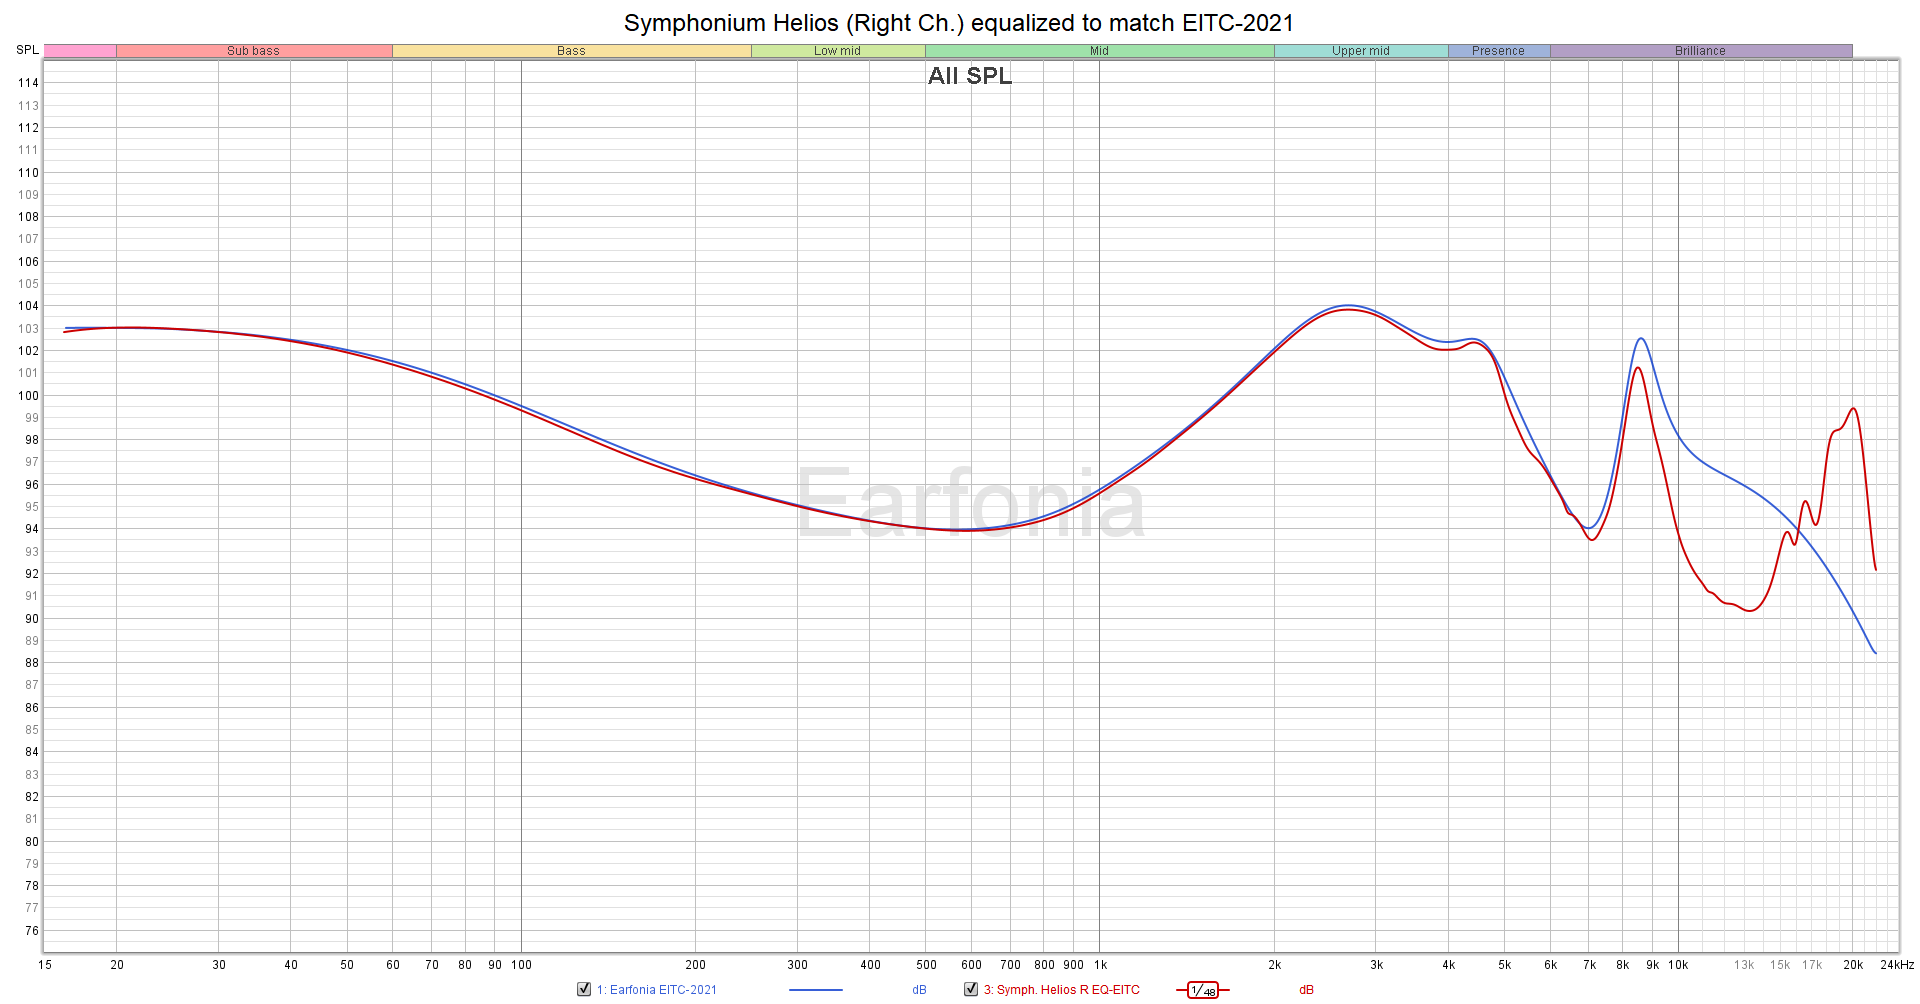 M07 Symphonium Helios - equalized to match EITC-2021.png